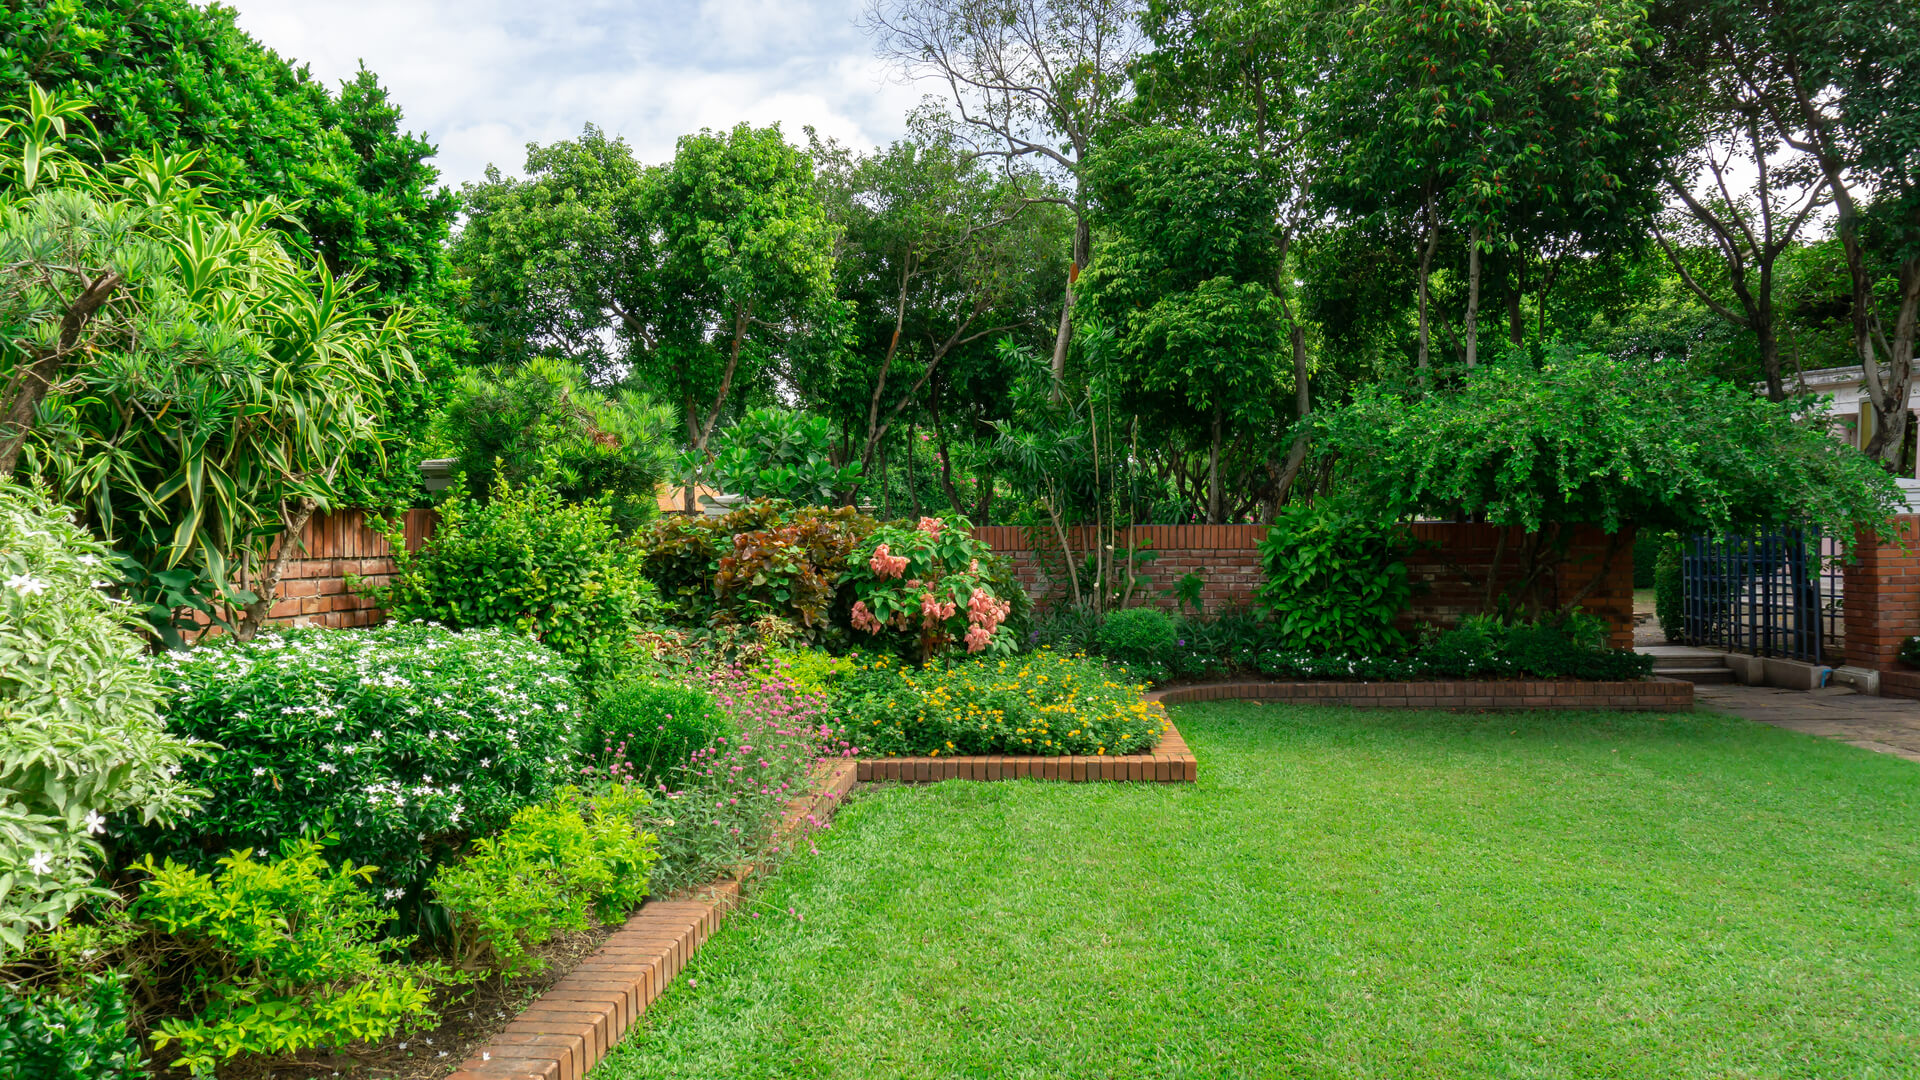 Lawn Care in Plano TX – For Outdoor Space Worthy of the State’s Heritage